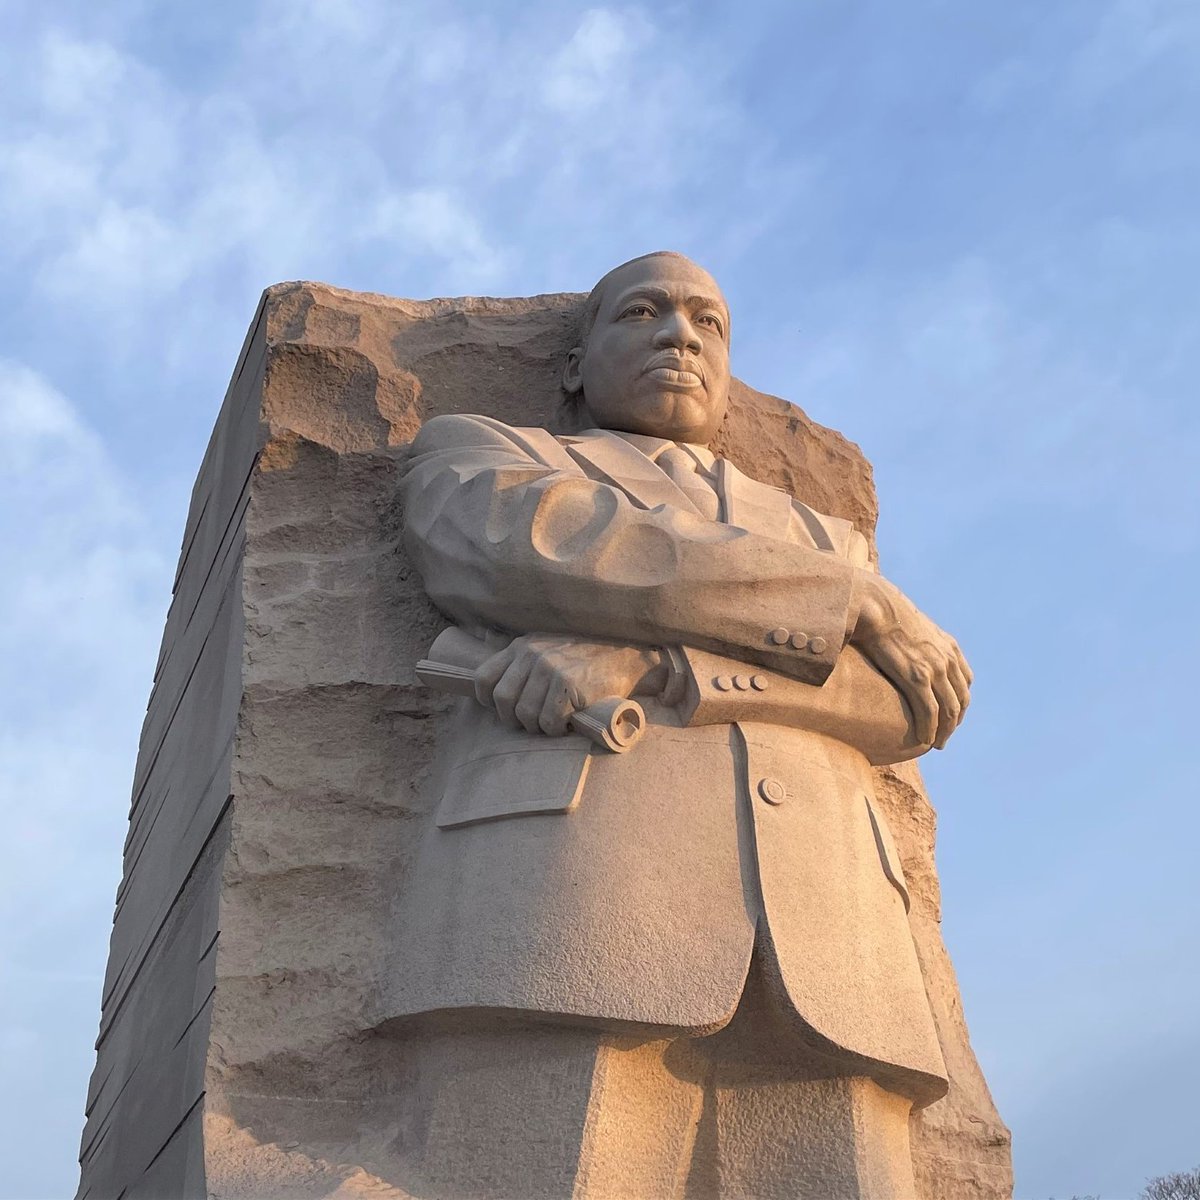 Murdered #OTD in 1968 in Memphis, Tennessee, at the age of 39, Dr. Martin Luther King, Jr.'s influence is still felt today. His words - spoken by students and carved in stone - continue to inspire people to work for more justice and equality in the world.